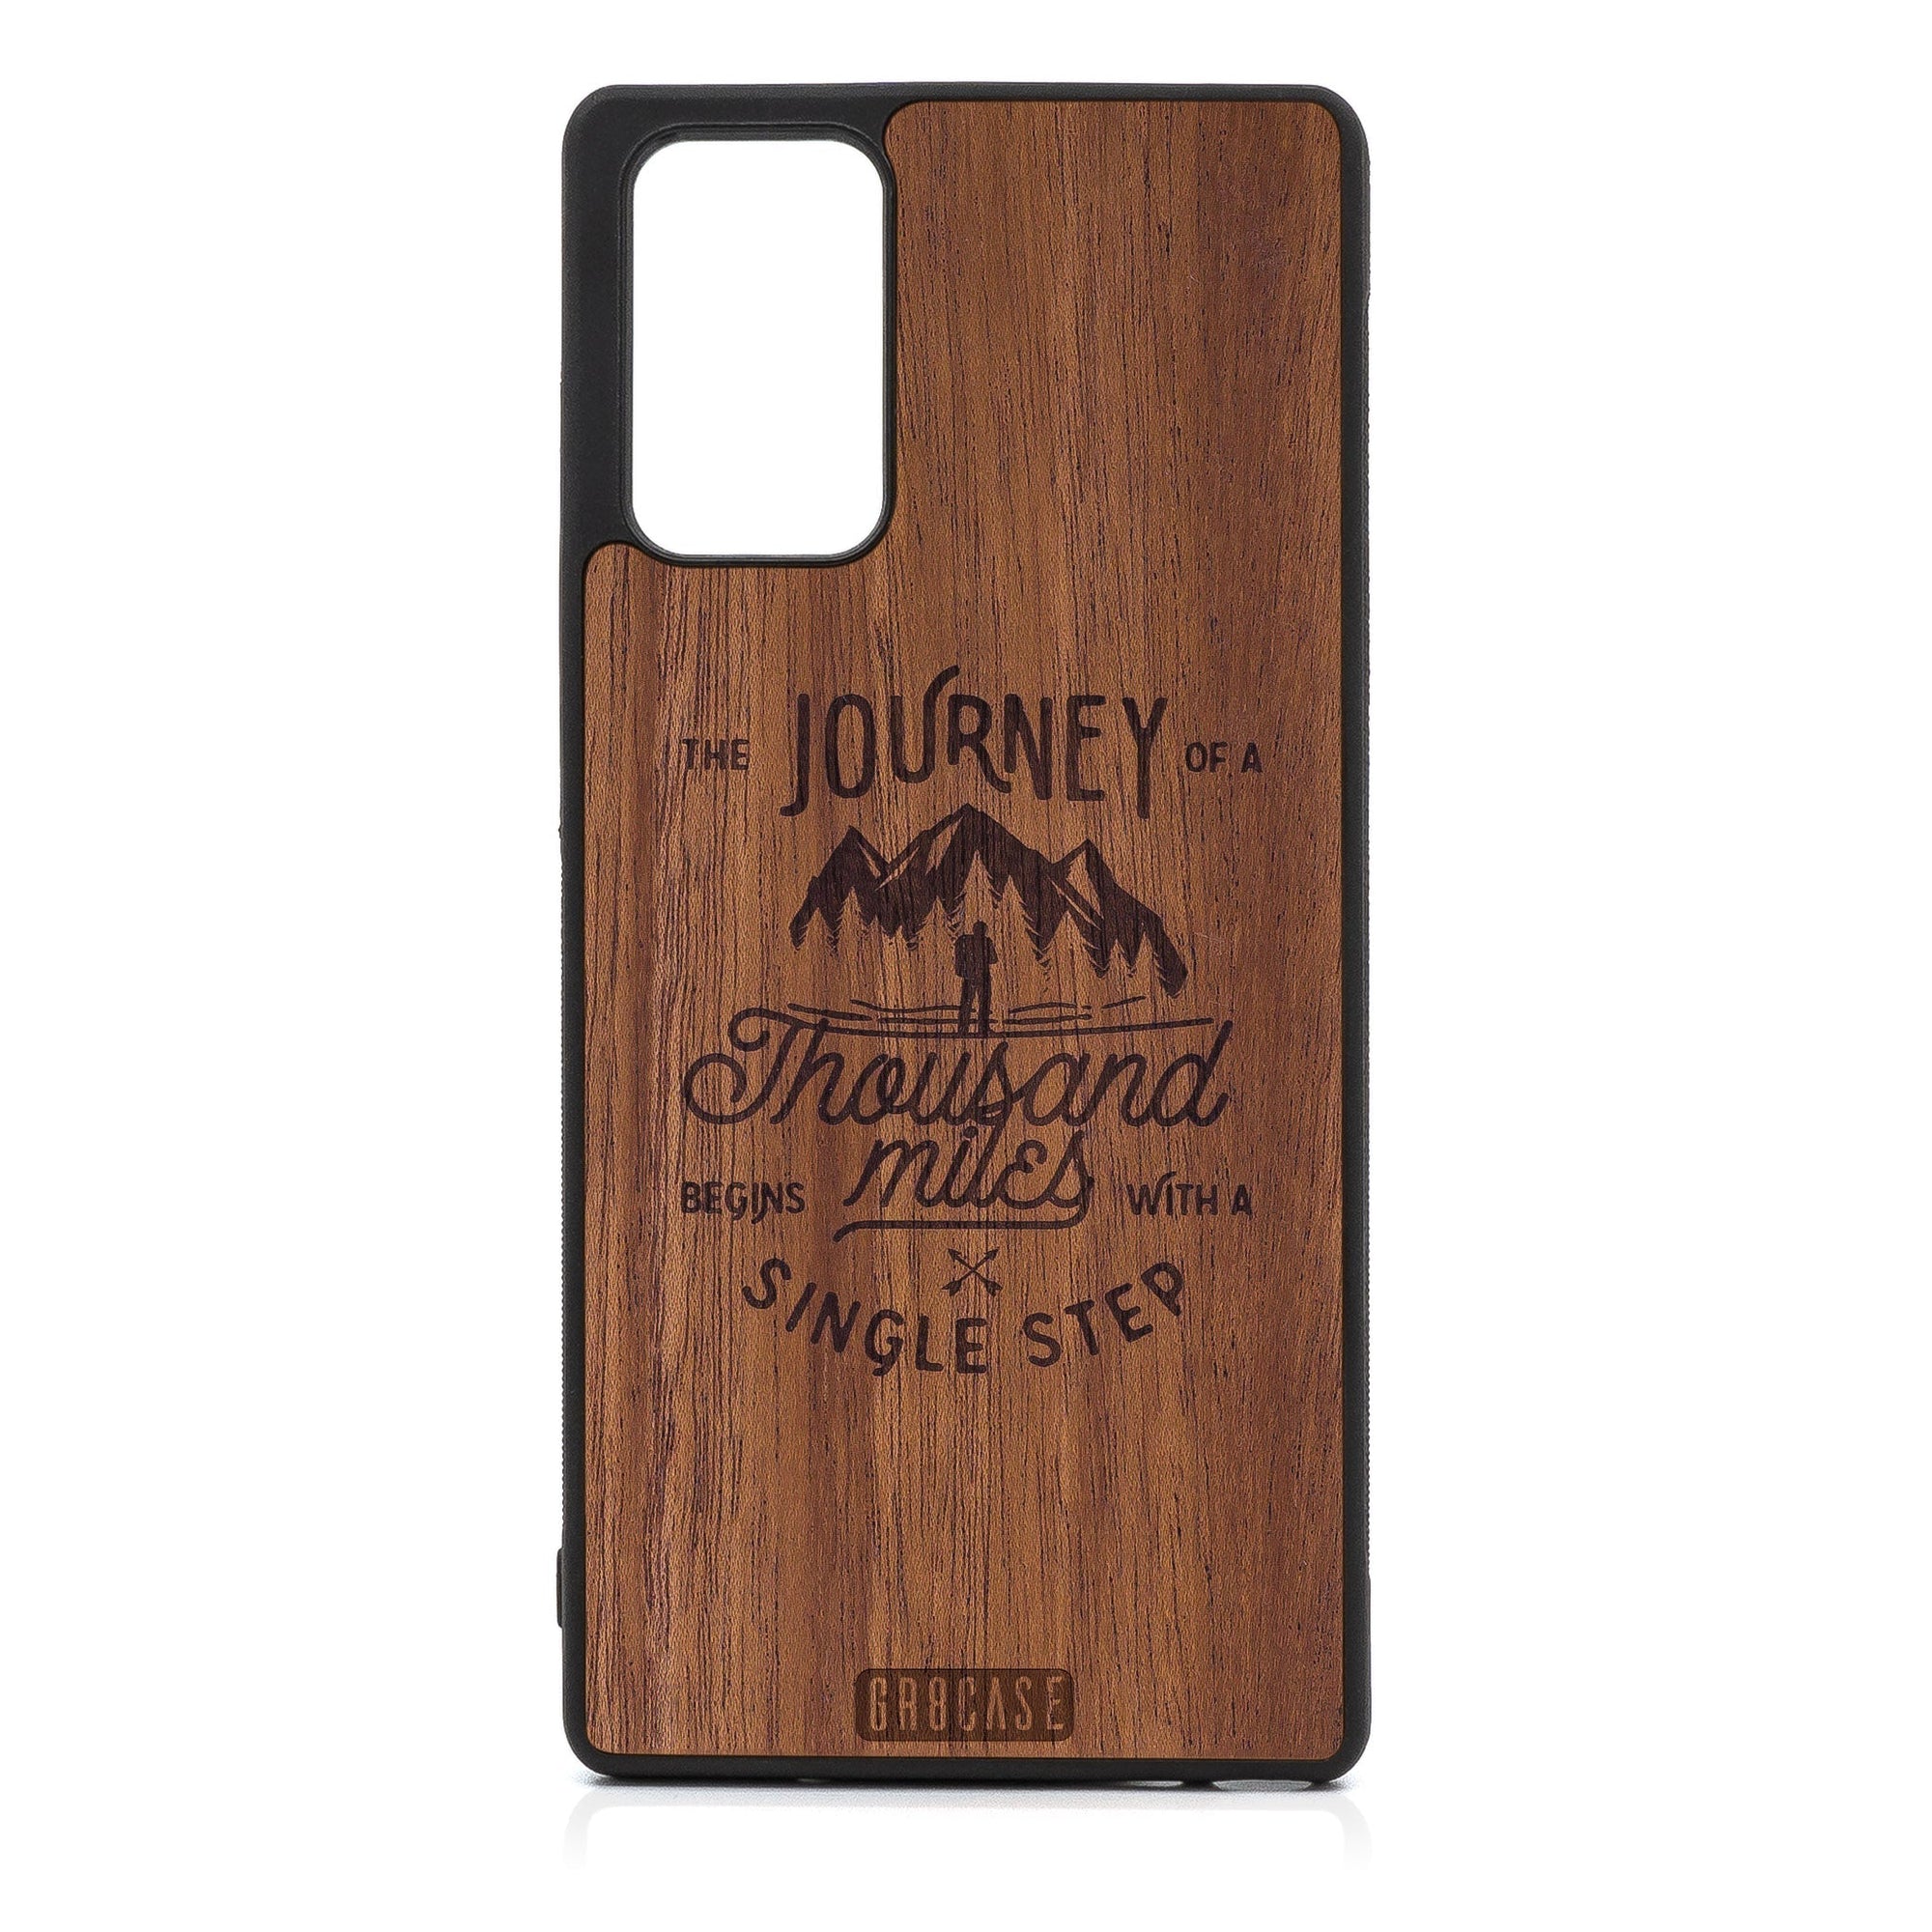 The Journey Of A Thousand Miles Begins With A Single Step Design Wood Case For Samsung Galaxy A53 5G